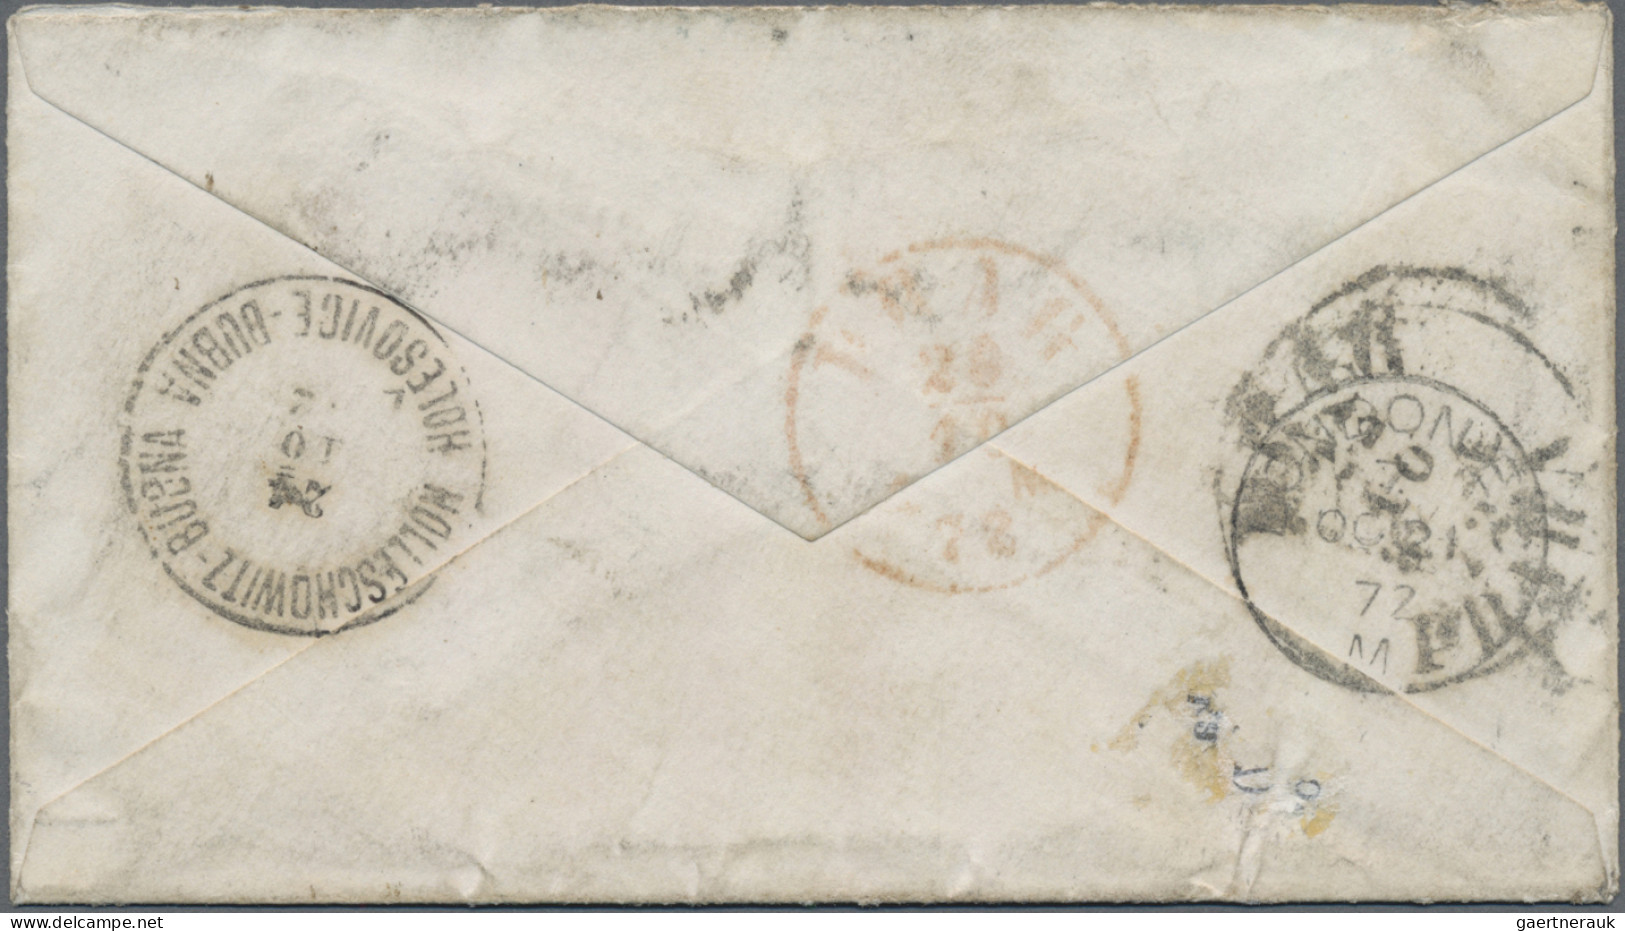 Great Britain: 1872 Stampless Cover From London To Bubna, Redirected To Bubenc A - Covers & Documents